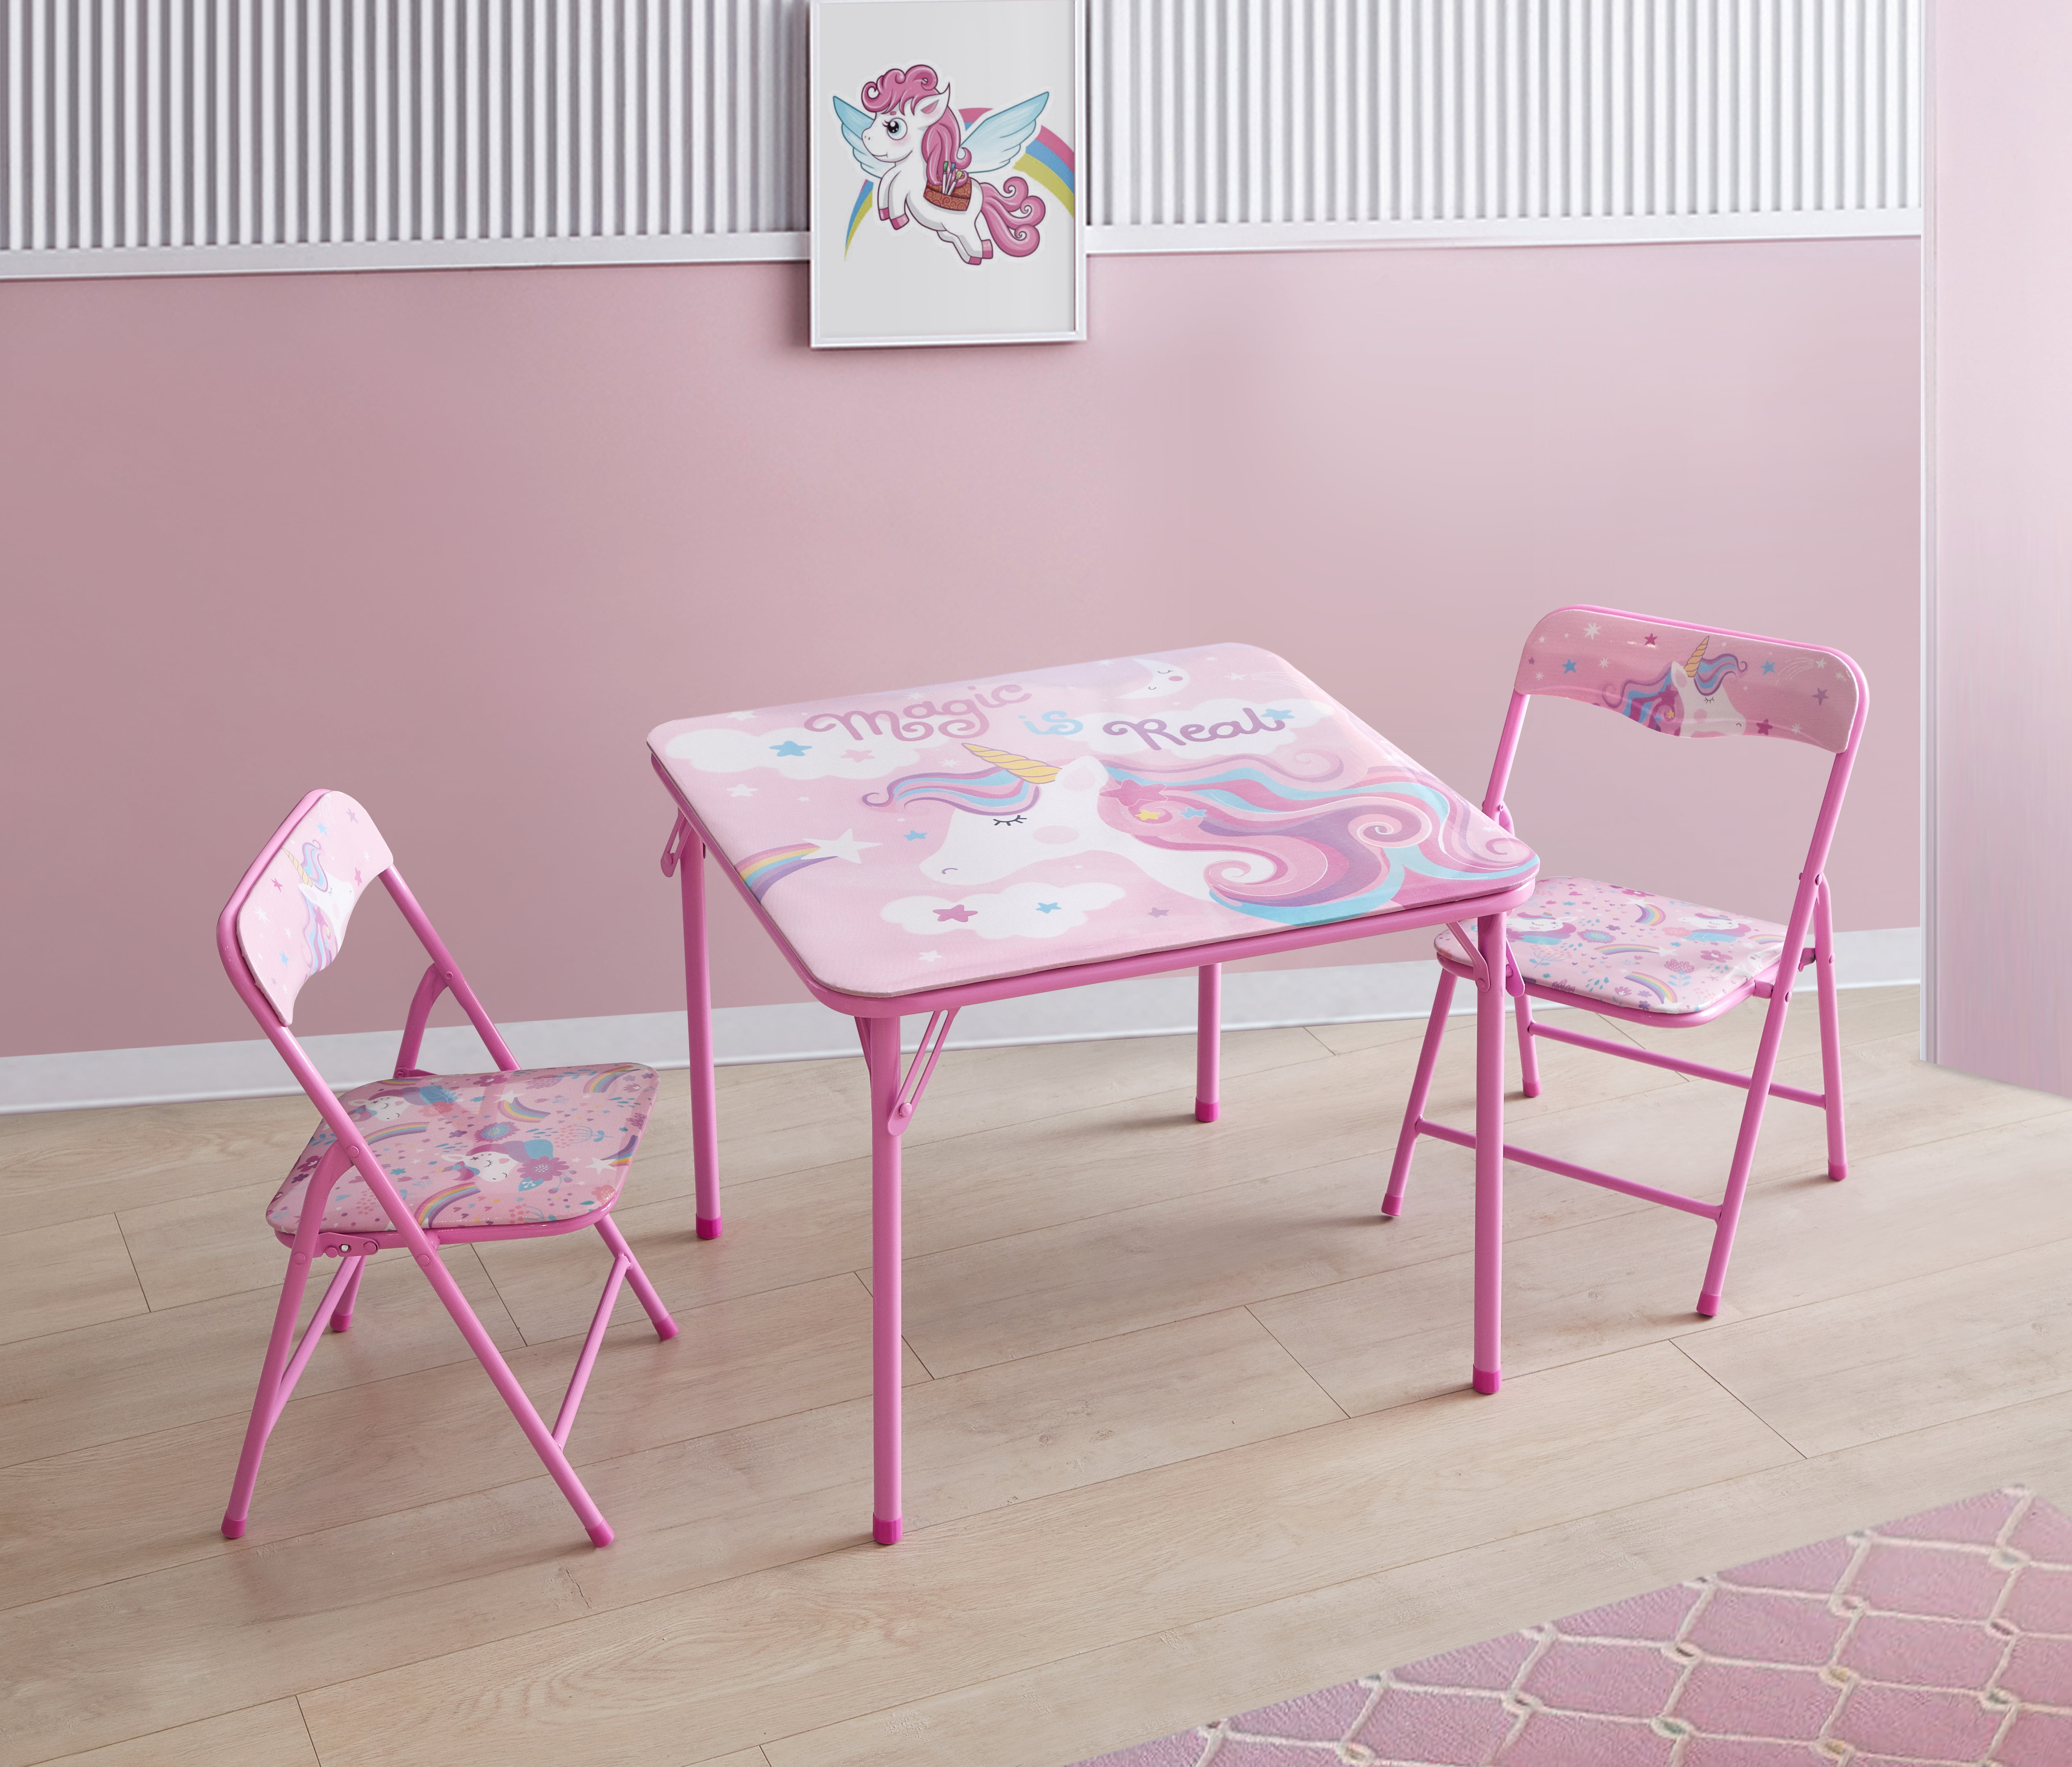 Pink/Purple Table Mate 4 Kids Original Plastic Folding Table and Chair Set 